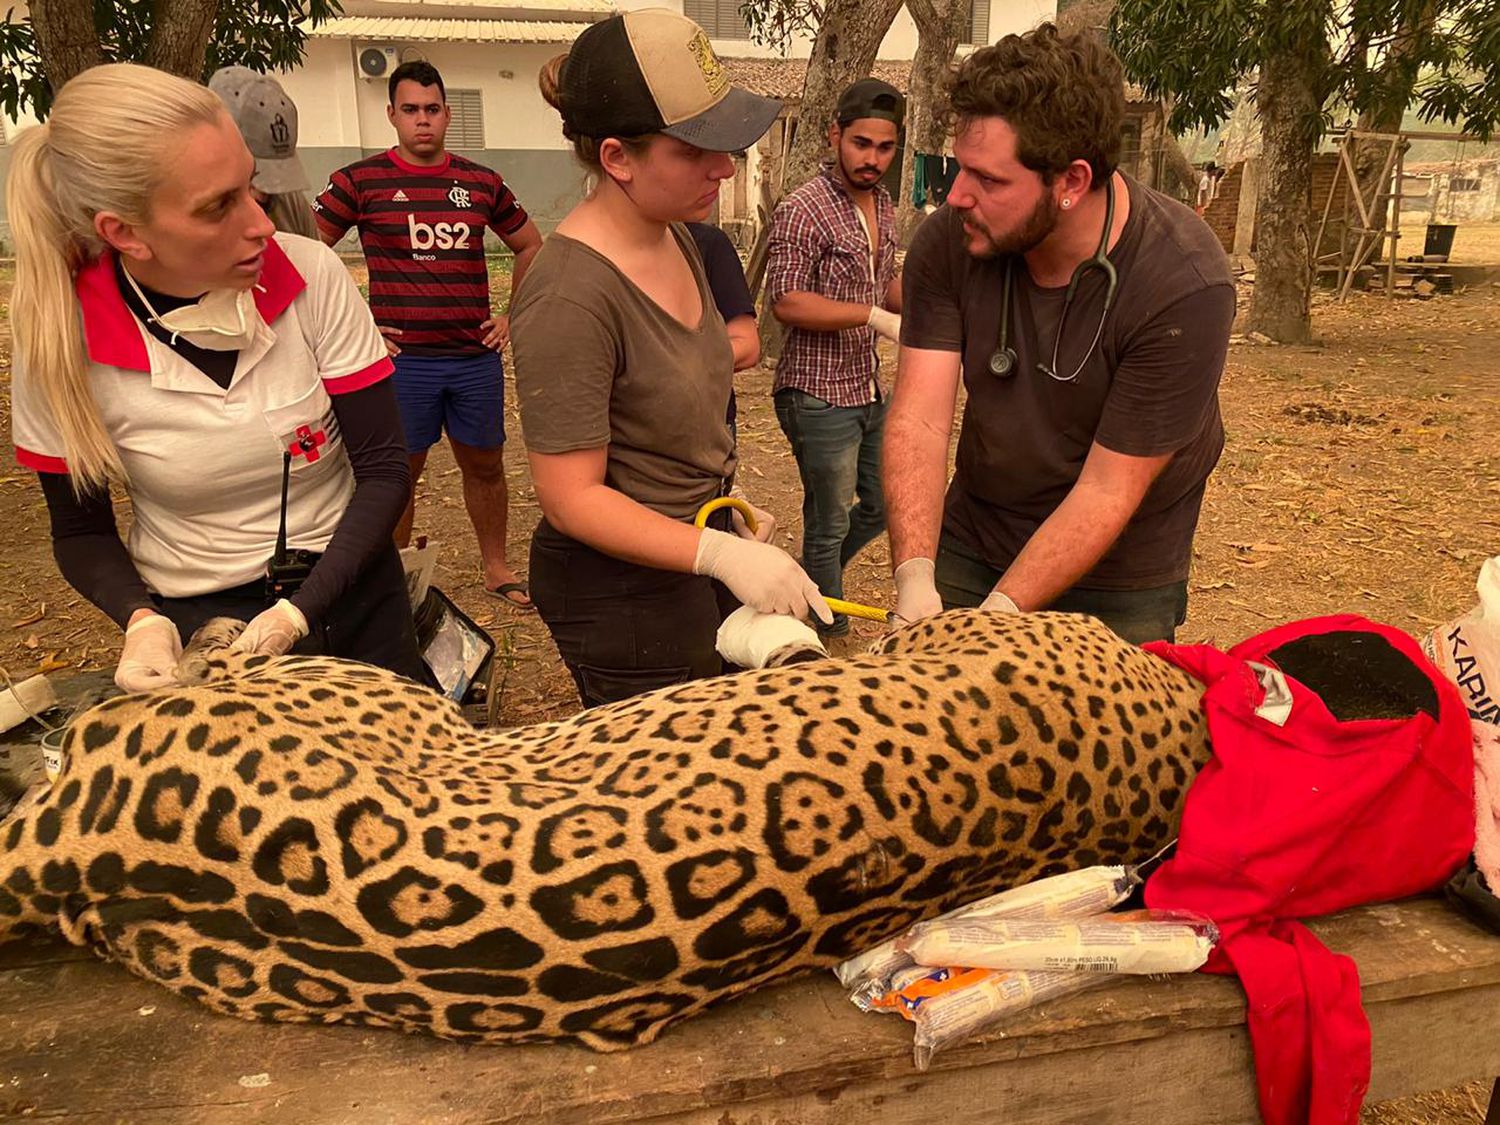 Volunteers and veterinarians take care of the jaguar rescued by the Falcão family during the fires in the Pantanal in Mato Grosso